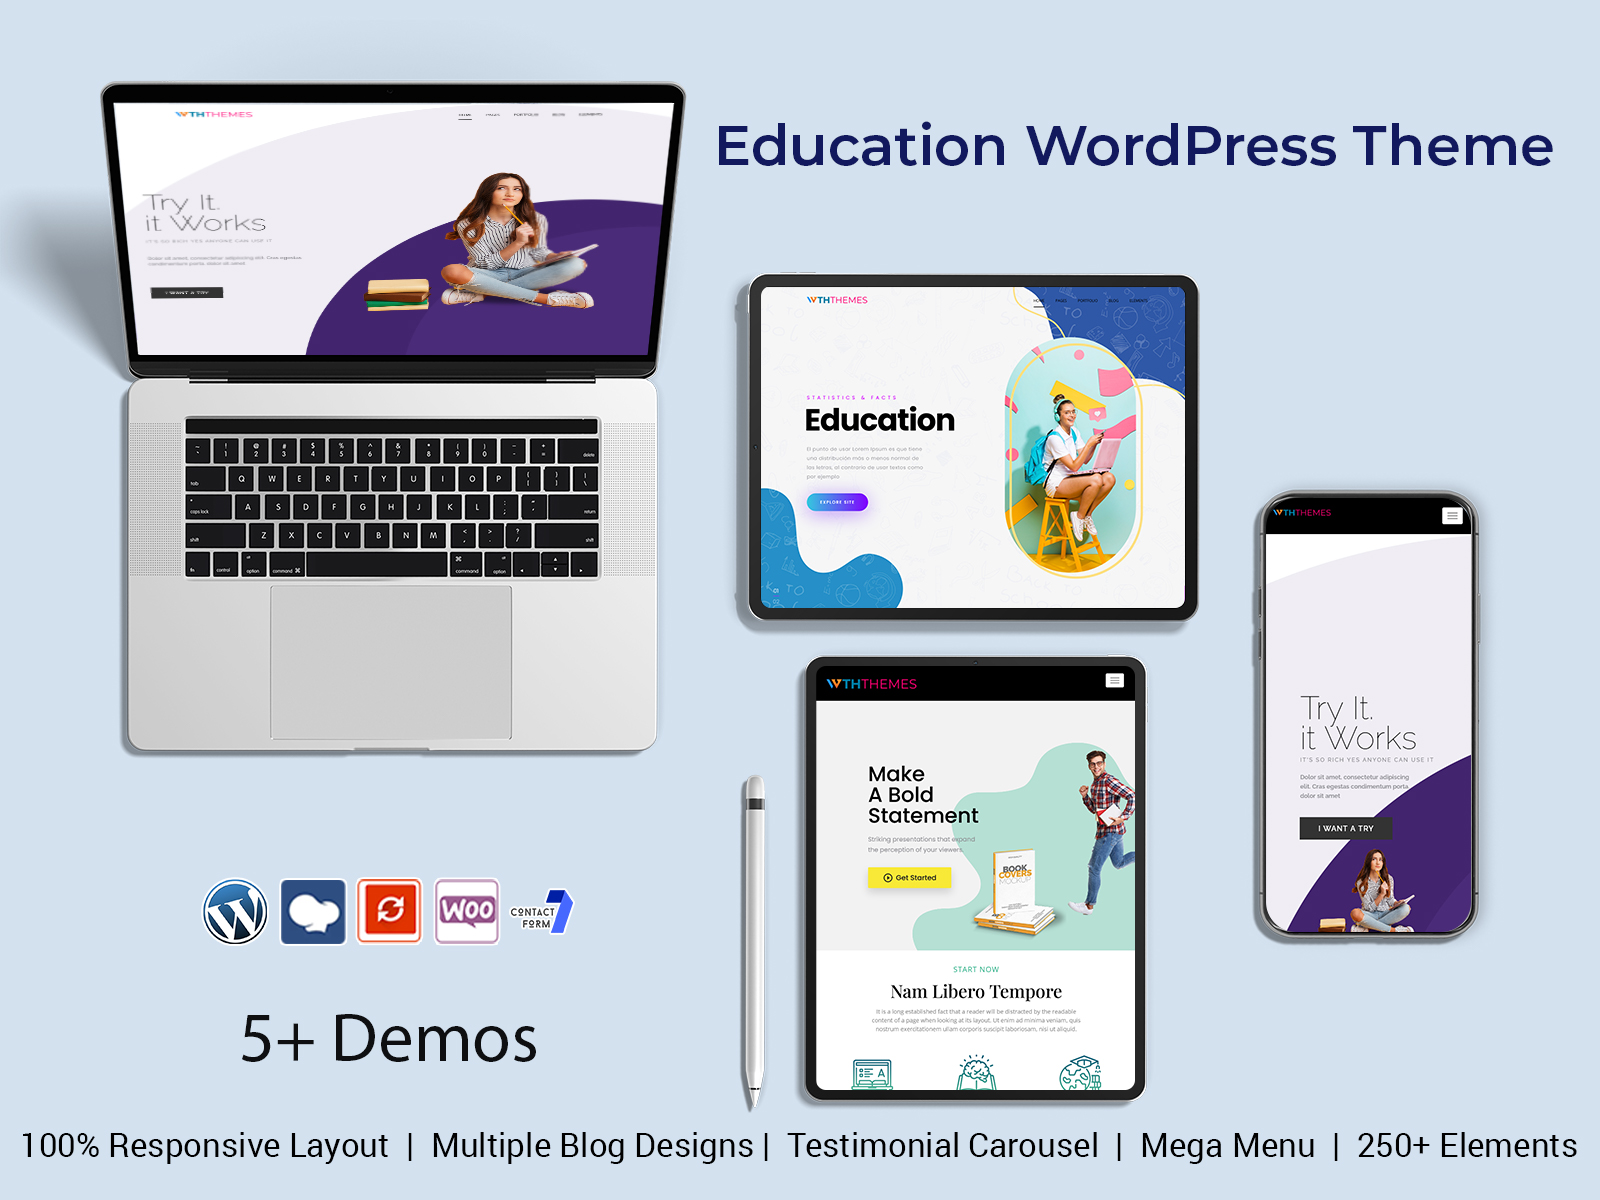 Education WordPress Themes For Small To Medium Business Owners